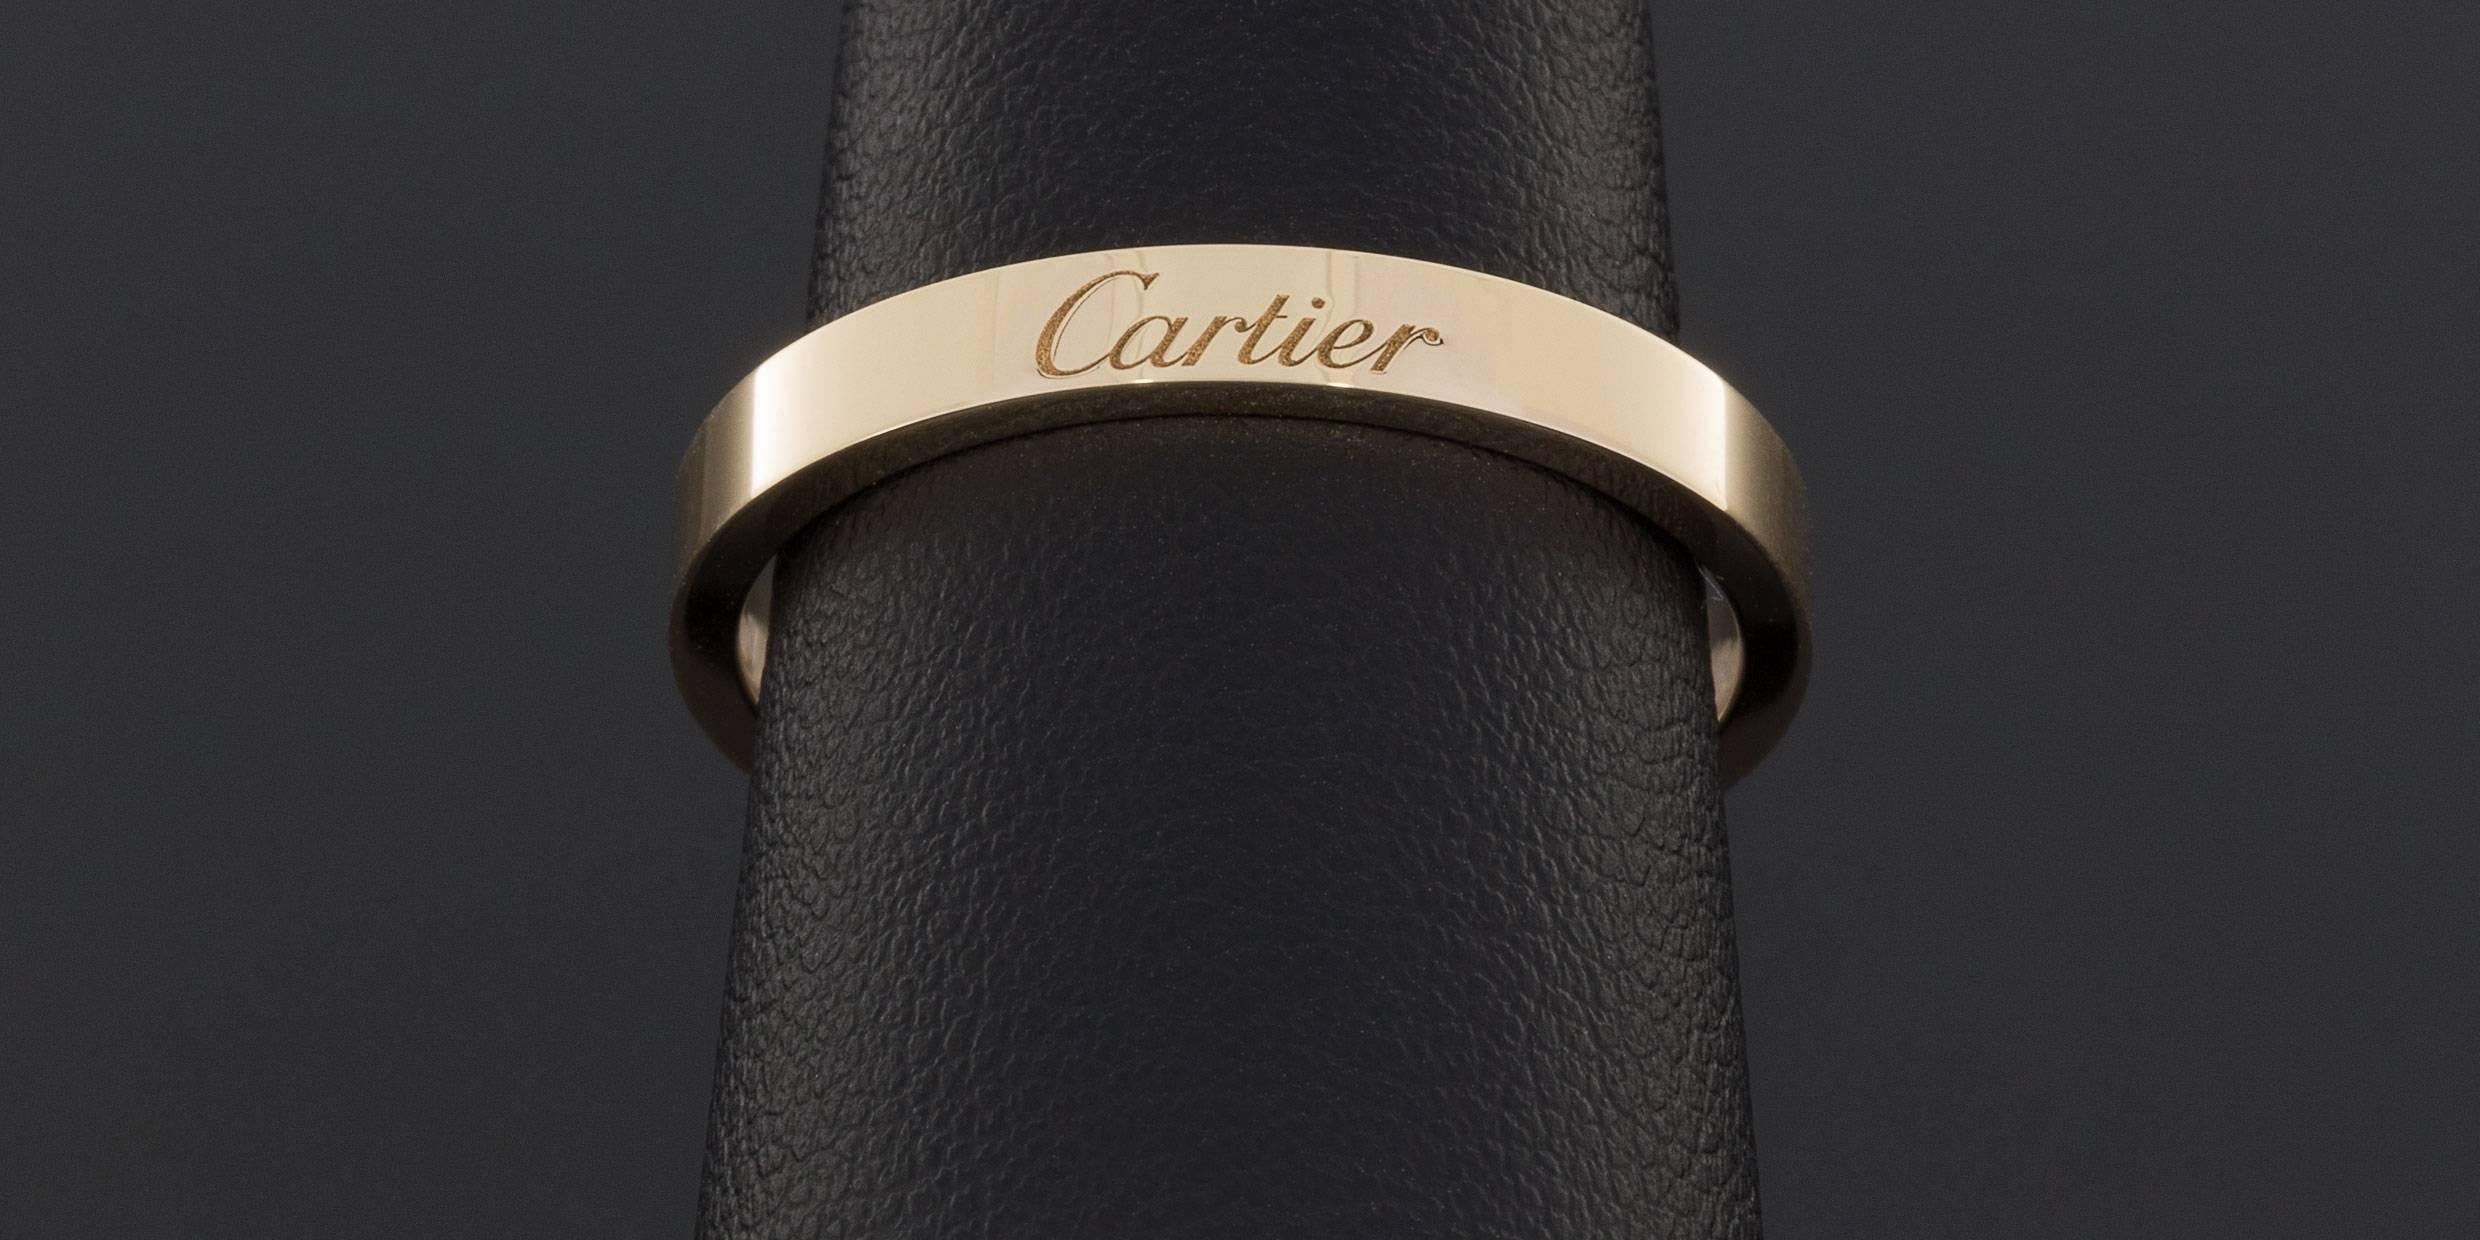 Women's or Men's Cartier 18 Karat Pink Gold 3mm Signature Engraved Wedding Band Ring With Box